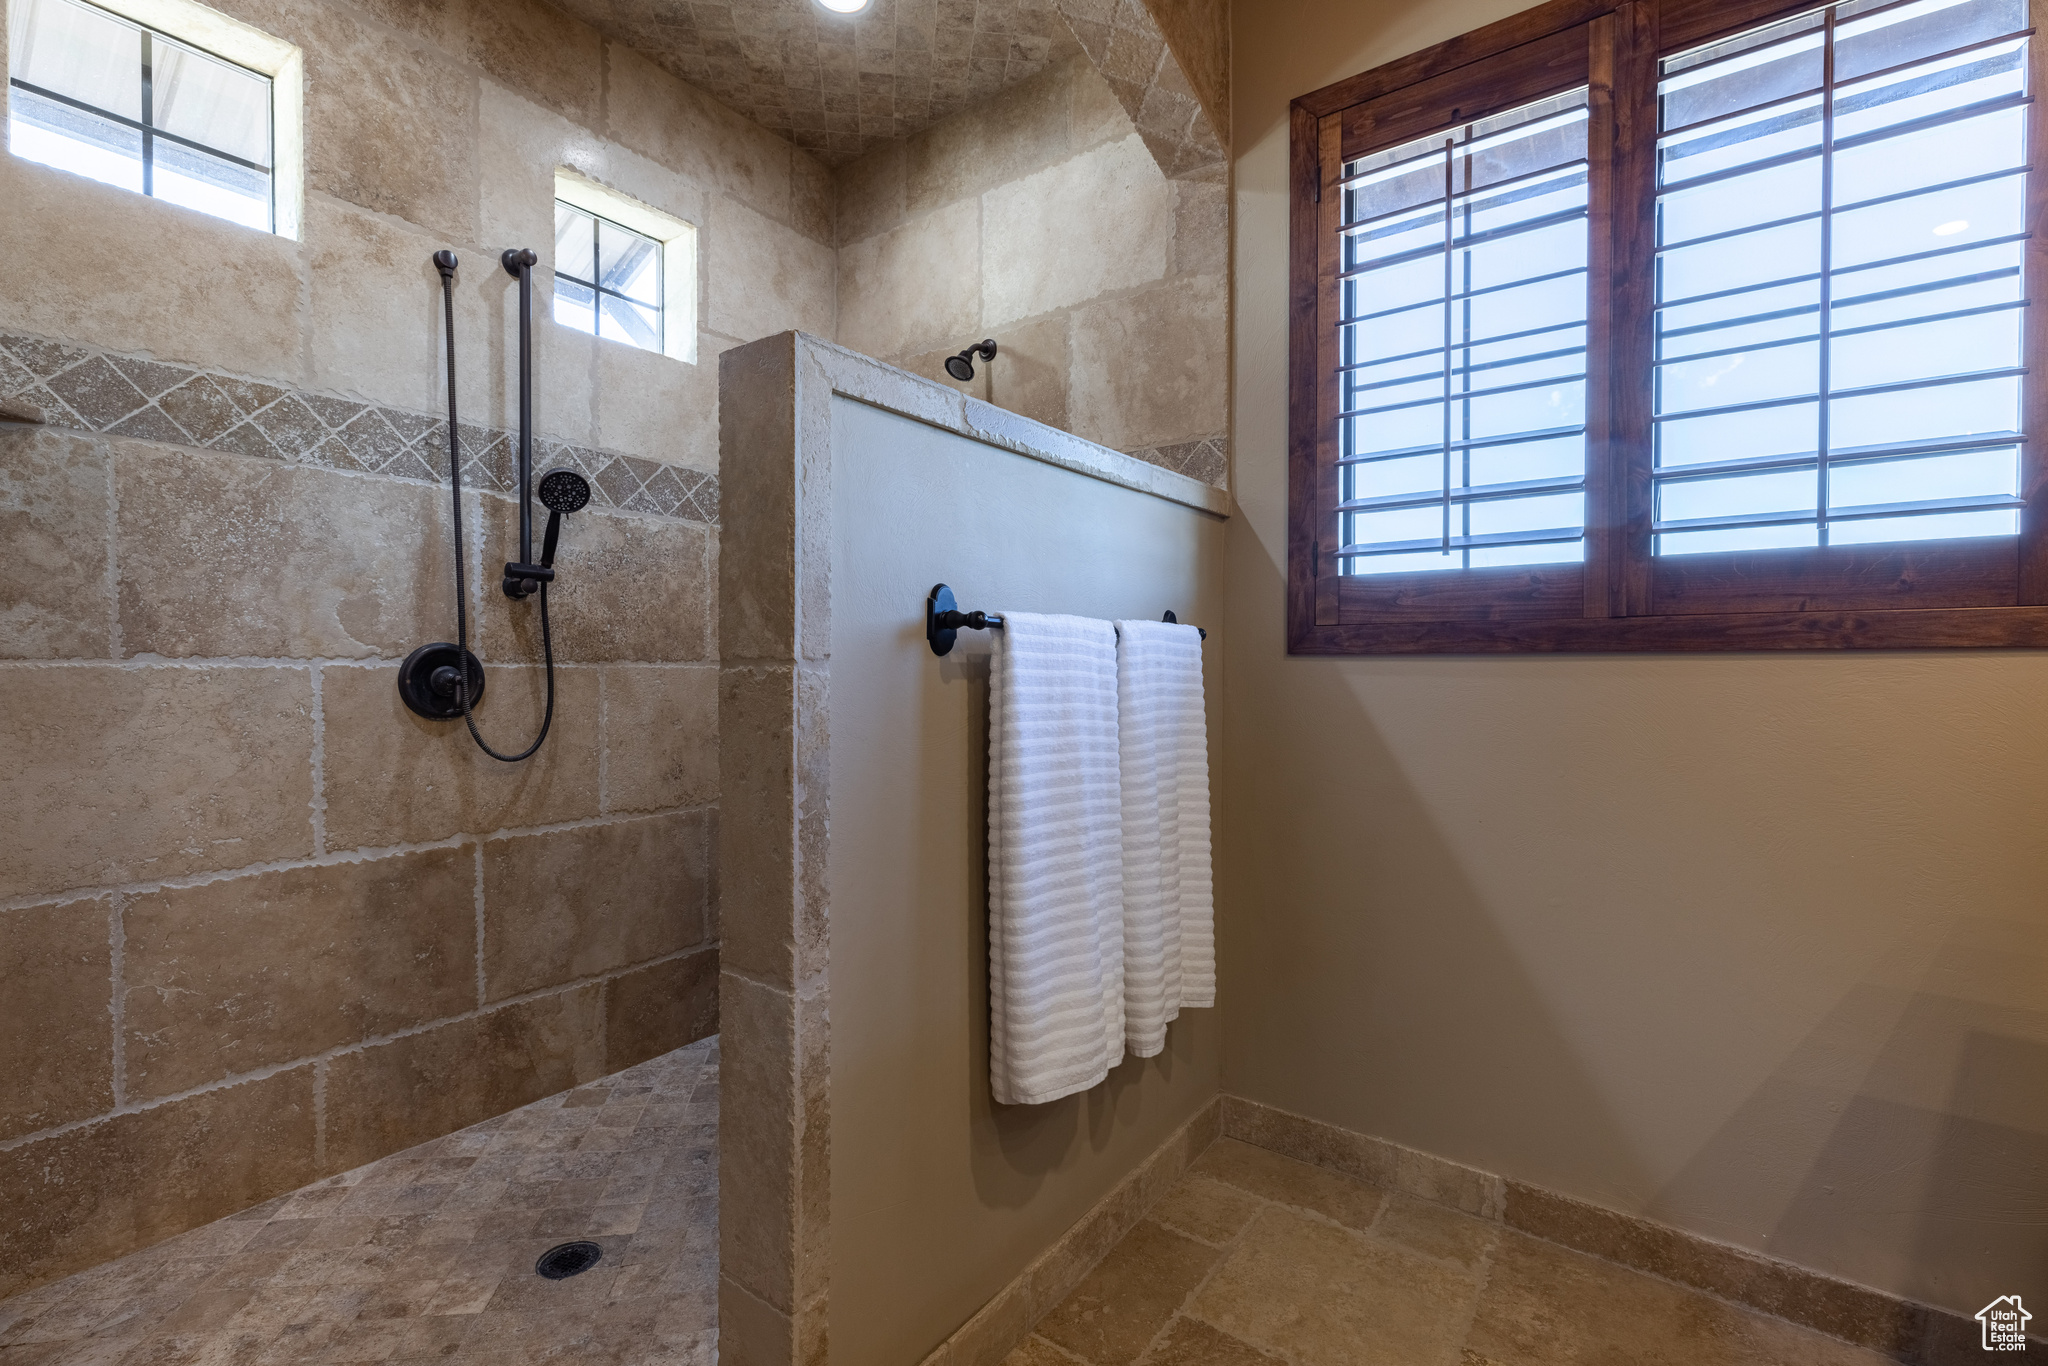 Principle suite Bathroom featuring tile flooring, tiled shower, and a wealth of natural light